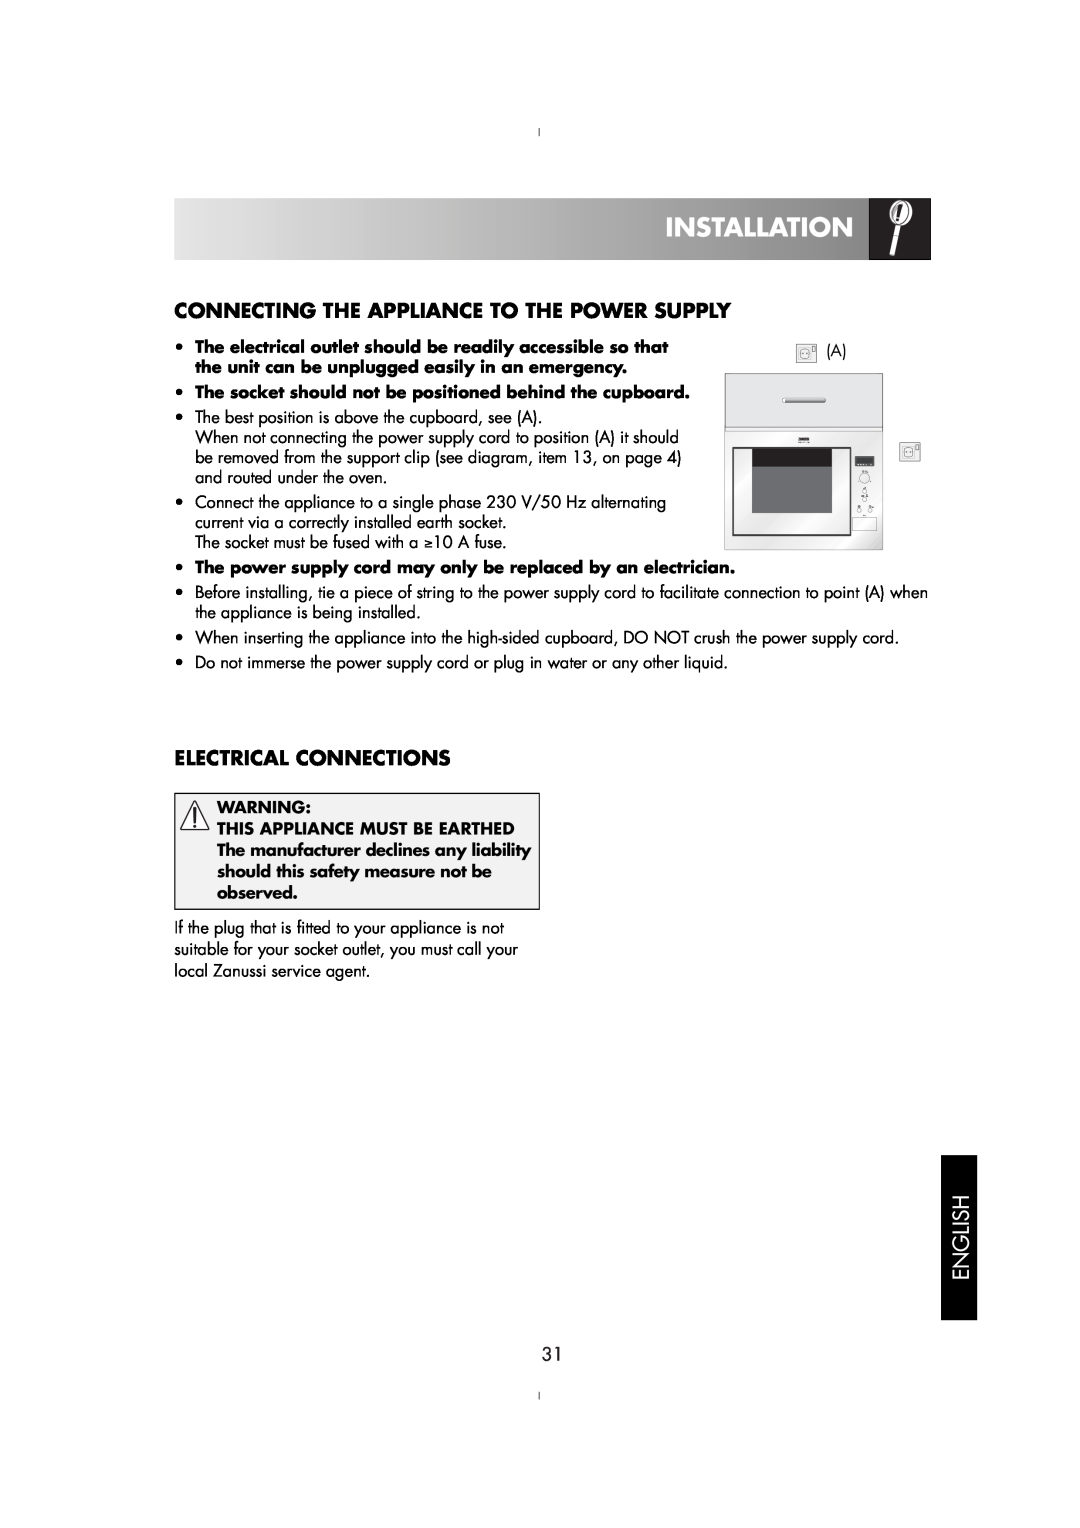 Zanussi ZM176ST, ZM175ST manual Connecting The Appliance To The Power Supply, Electrical Connections, Installation, English 